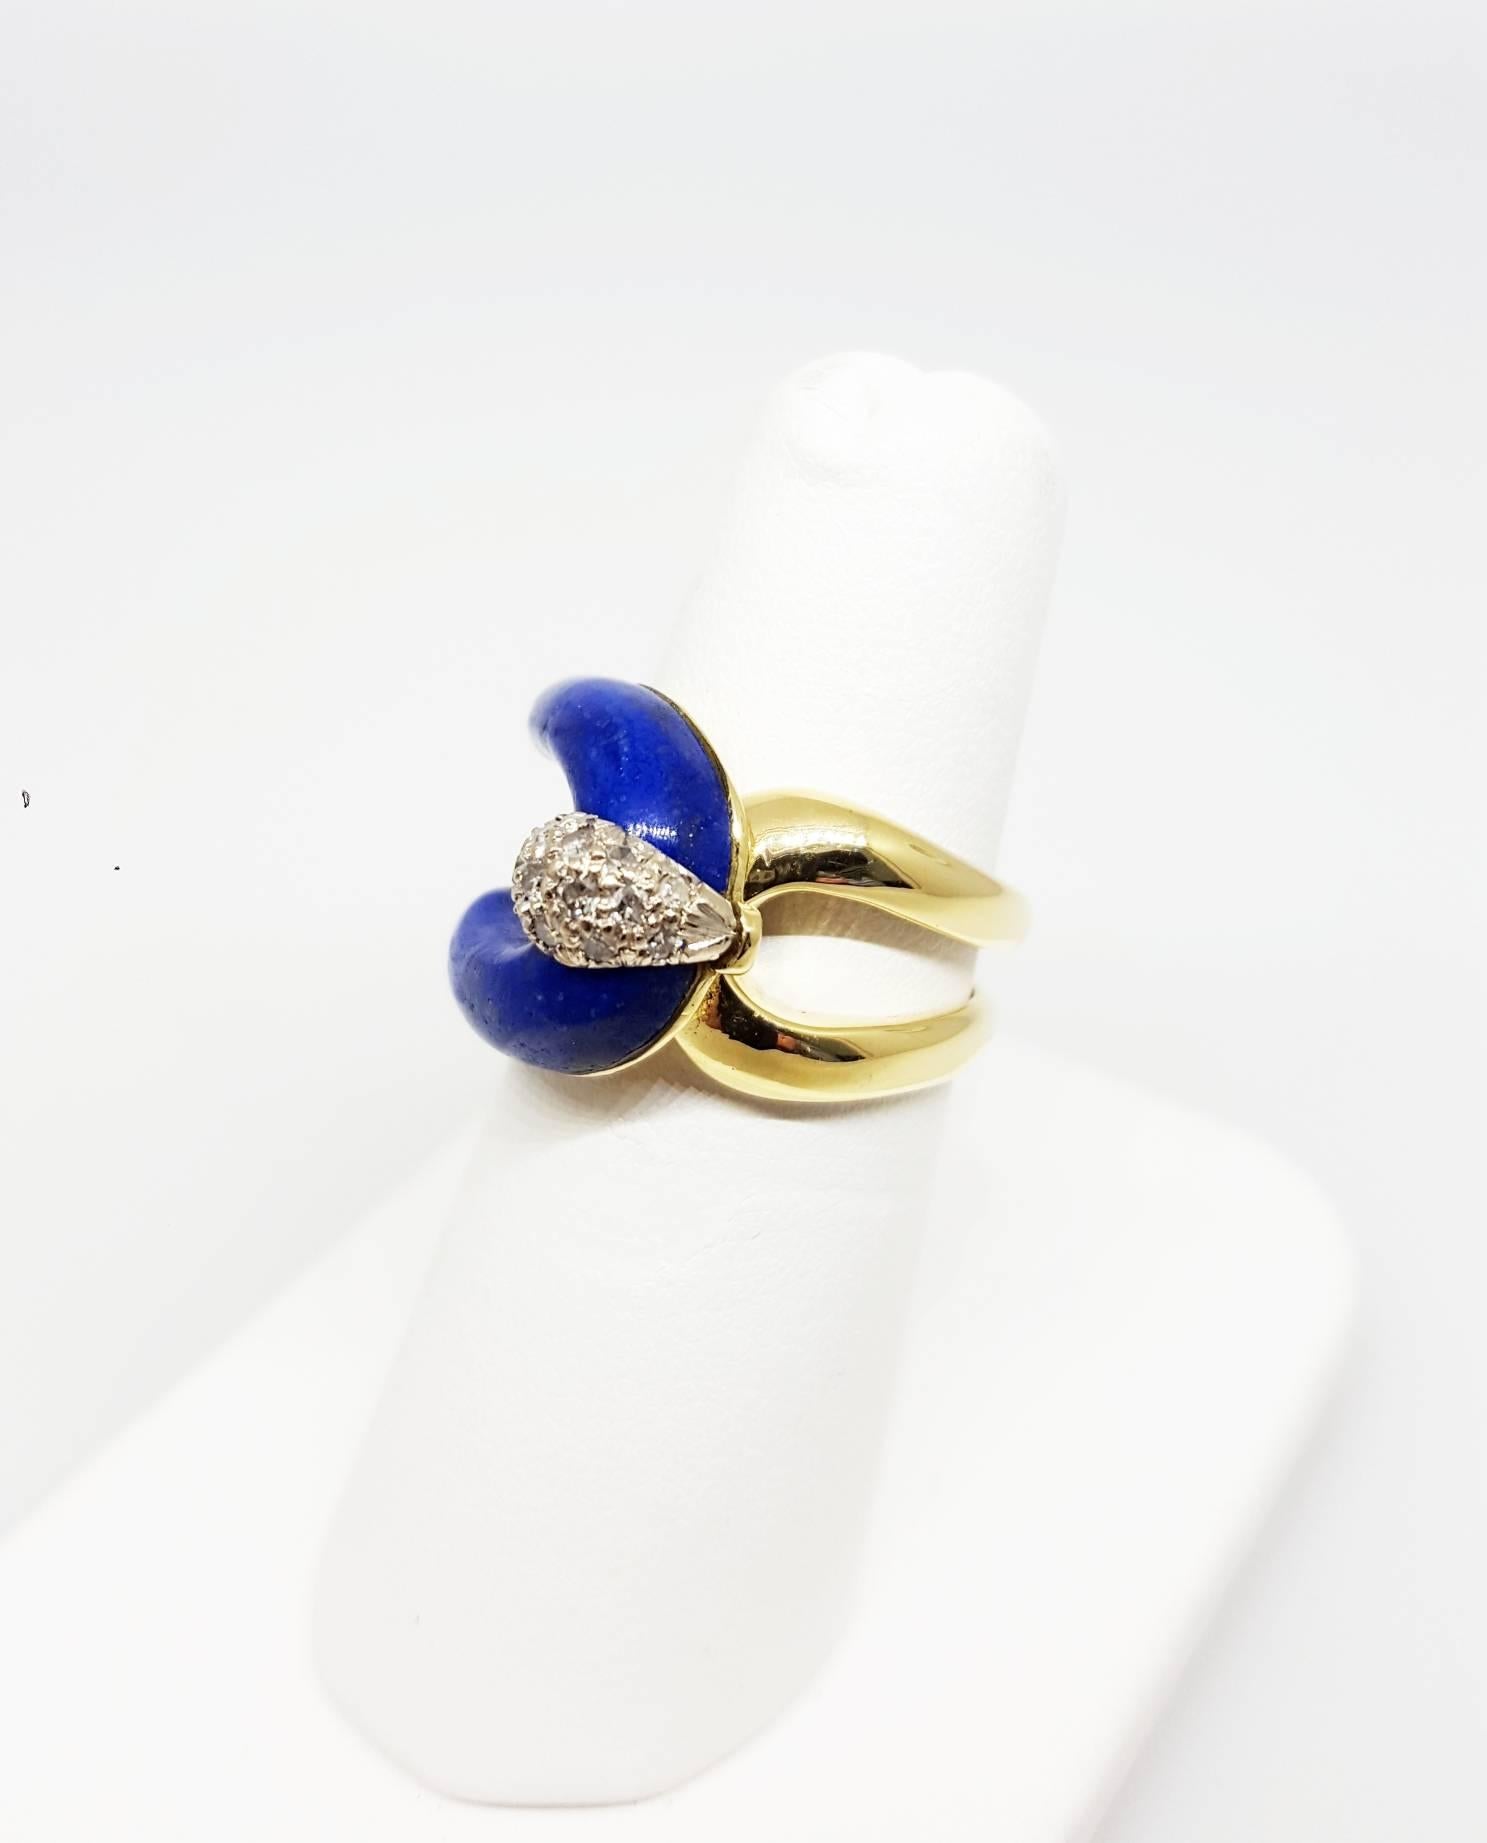 A 14 karat yellow gold ring inlaid with lapis and bead set with round step cut diamonds. There are a total of 15 diamonds that weigh approximately 0.25cttw. The ring is a size 5.5 and can be resized.

A ring like this is hard to find! It is a great